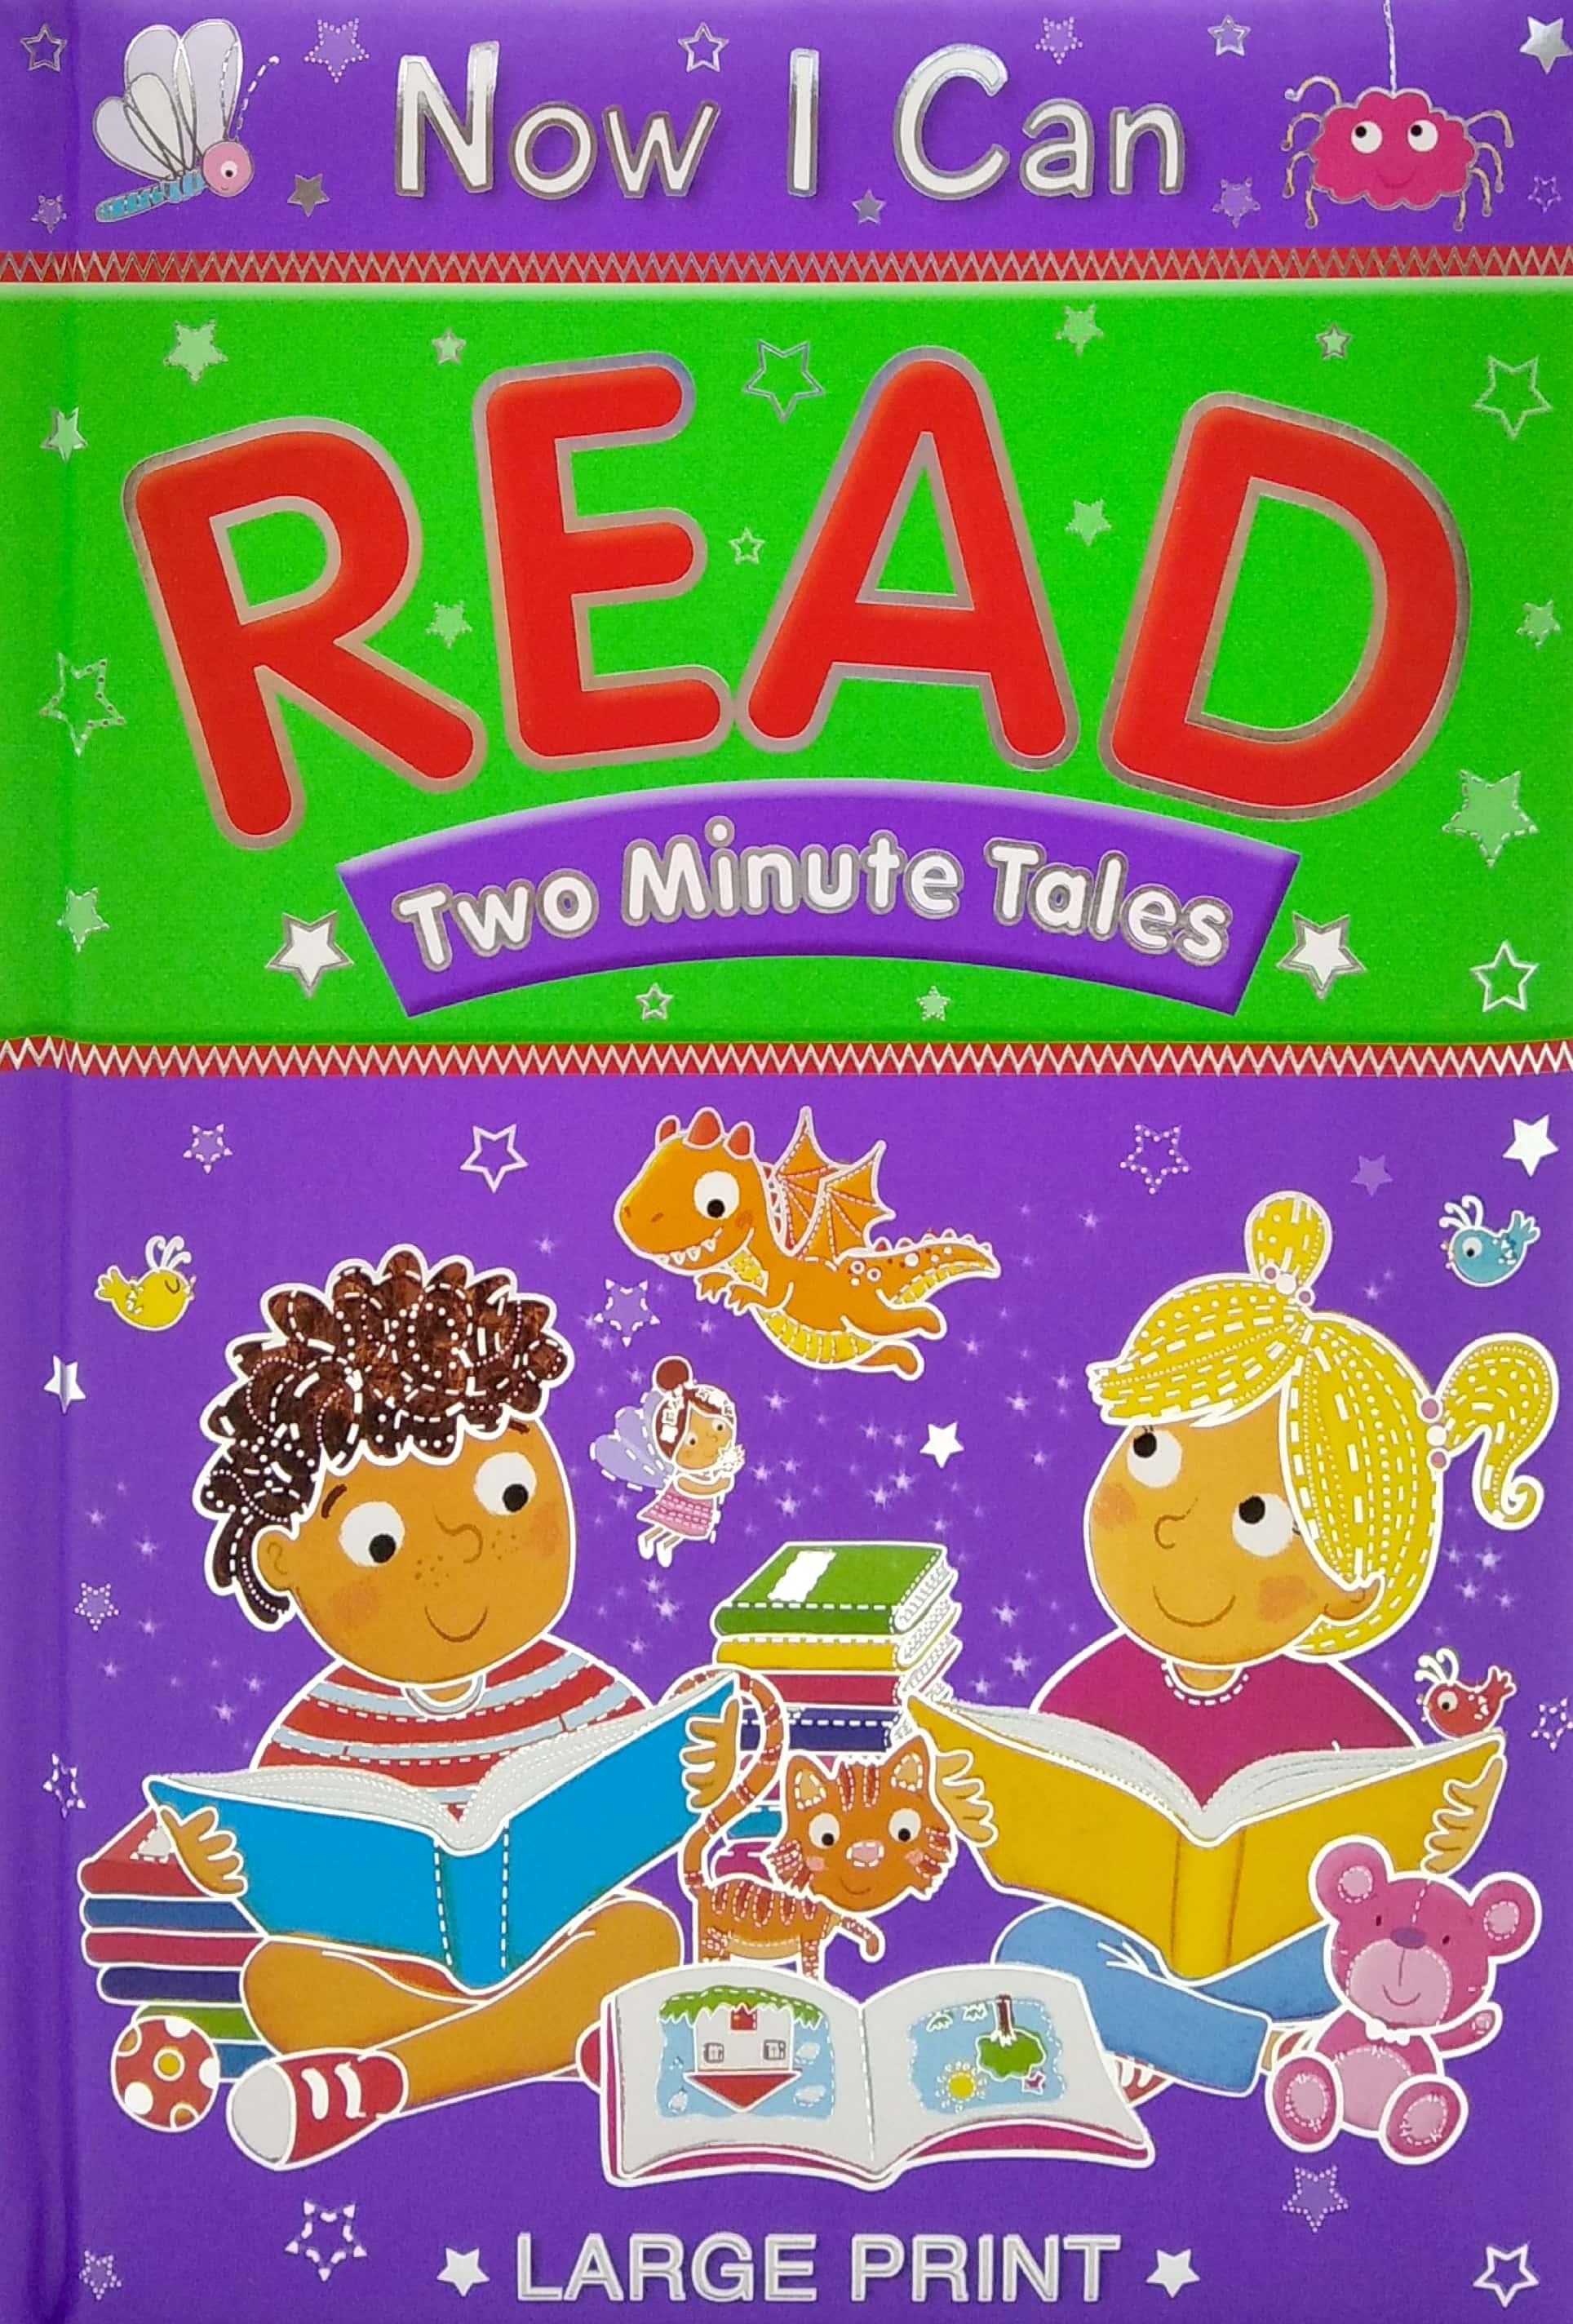 Now I Can Read: Two Minute Tales